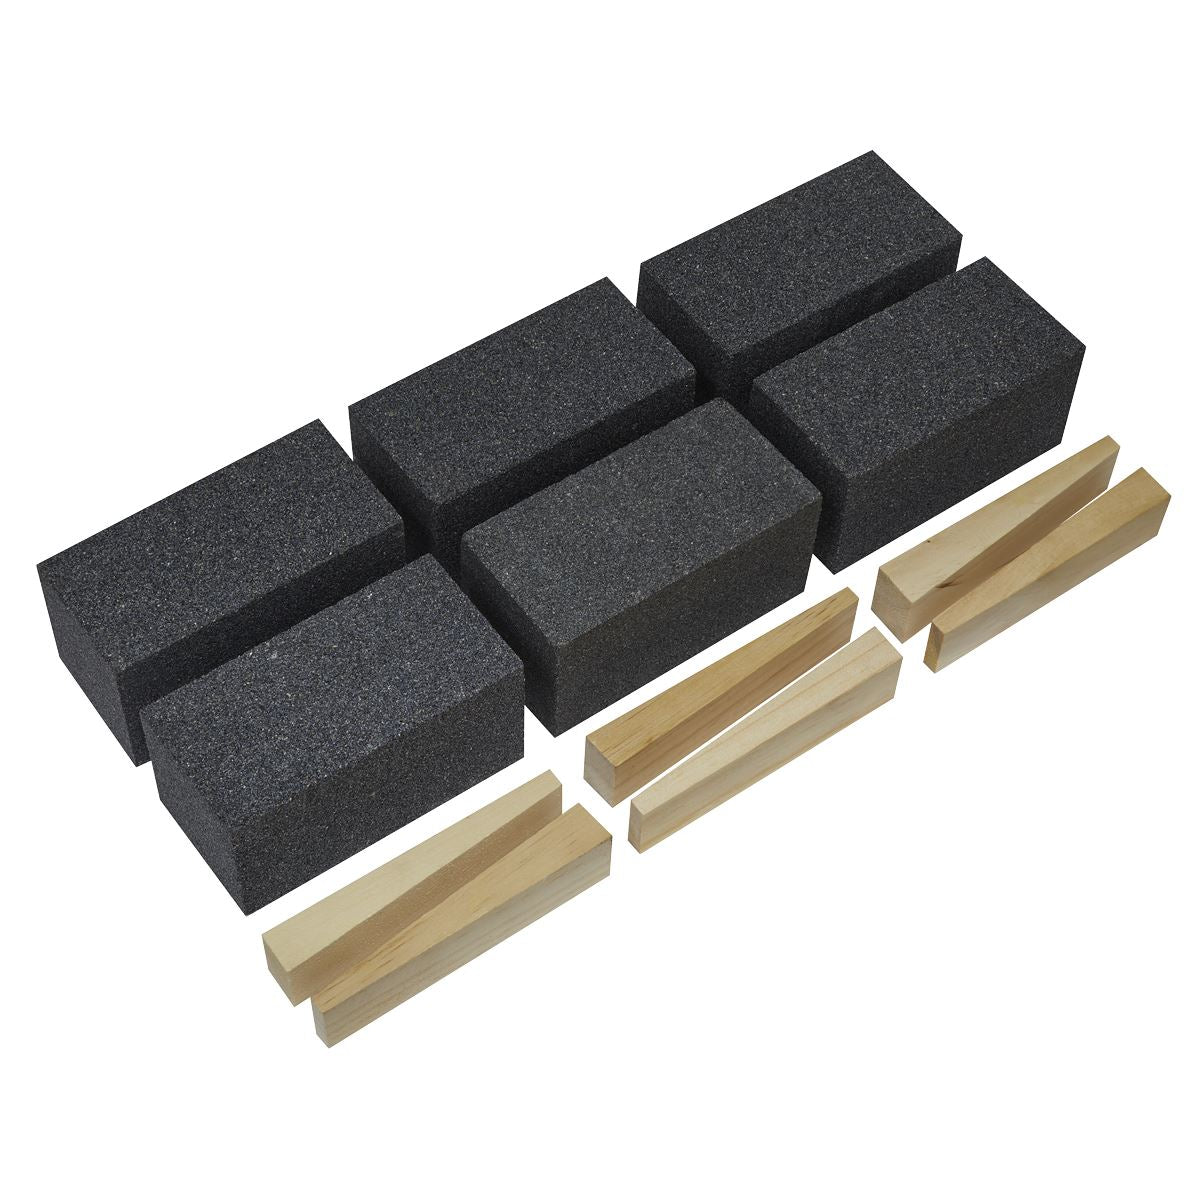 Worksafe by Sealey Floor Grinding Block 50 x 50 x 100mm 24Grit - Pack of 6